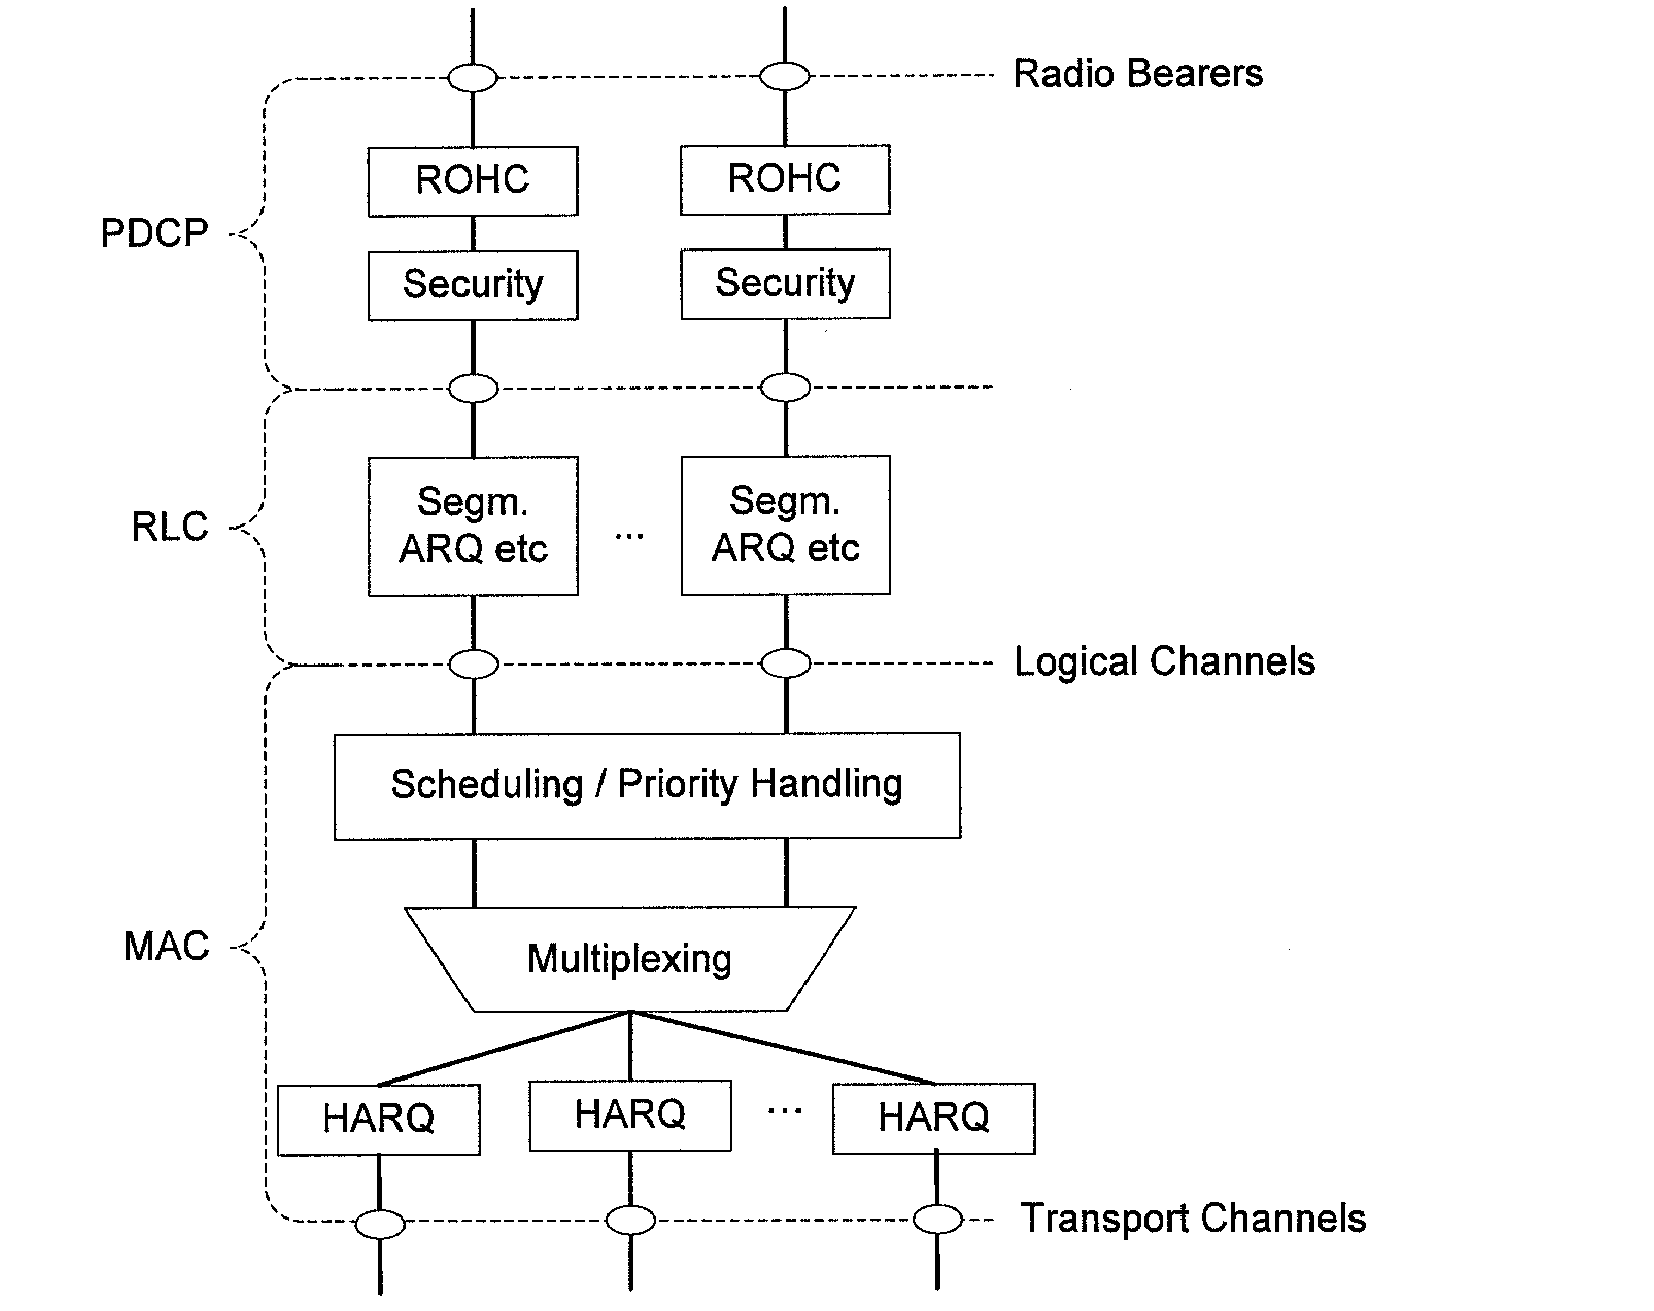 Method of performing a handover procedure in wireless communication system